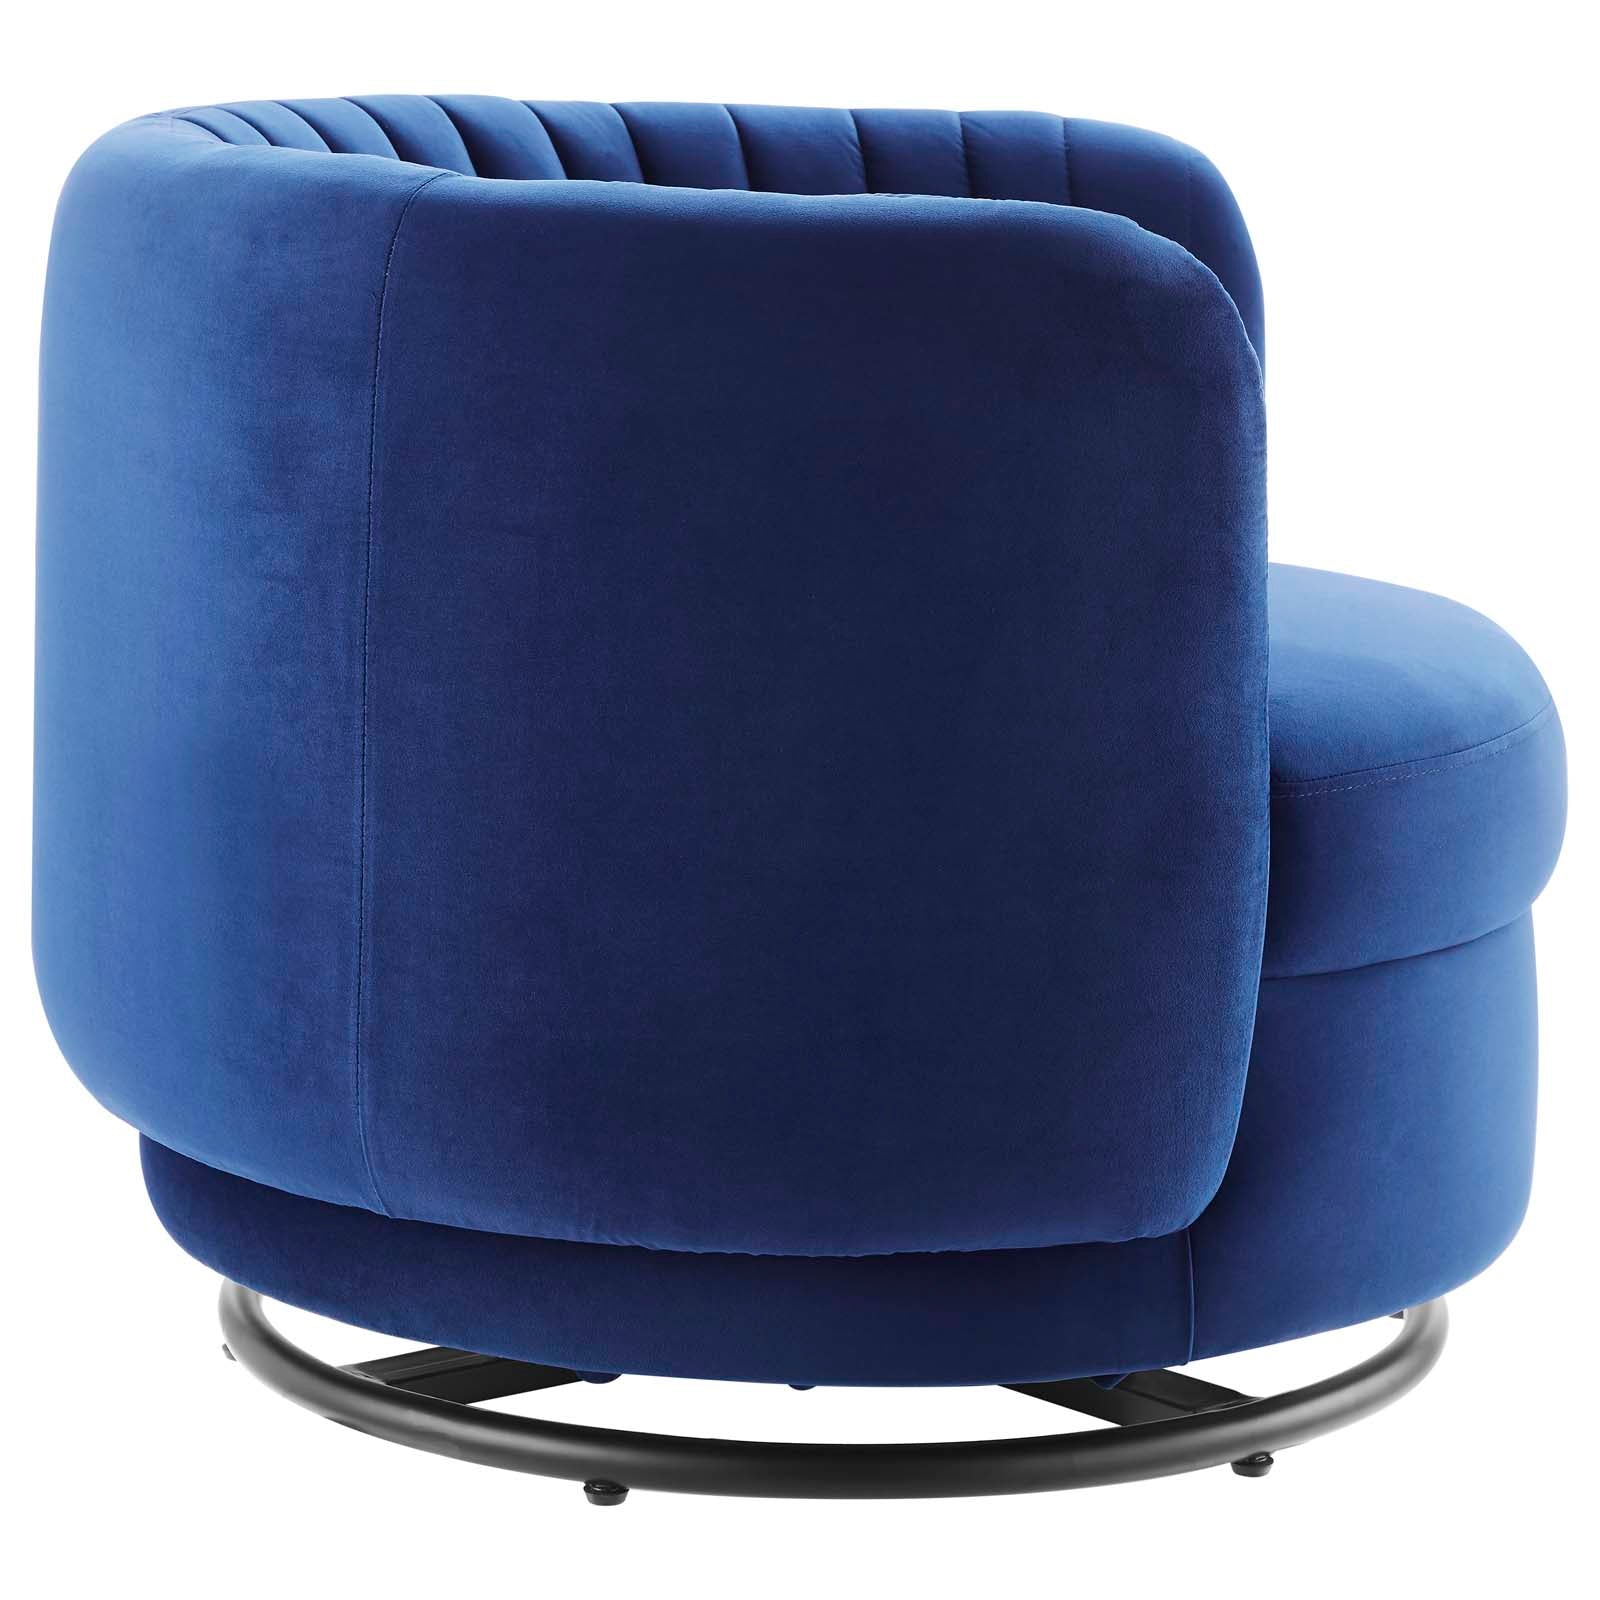 Modway Accent Chairs - Embrace Tufted Performance Velvet Performance Velvet Swivel Chair Black Navy